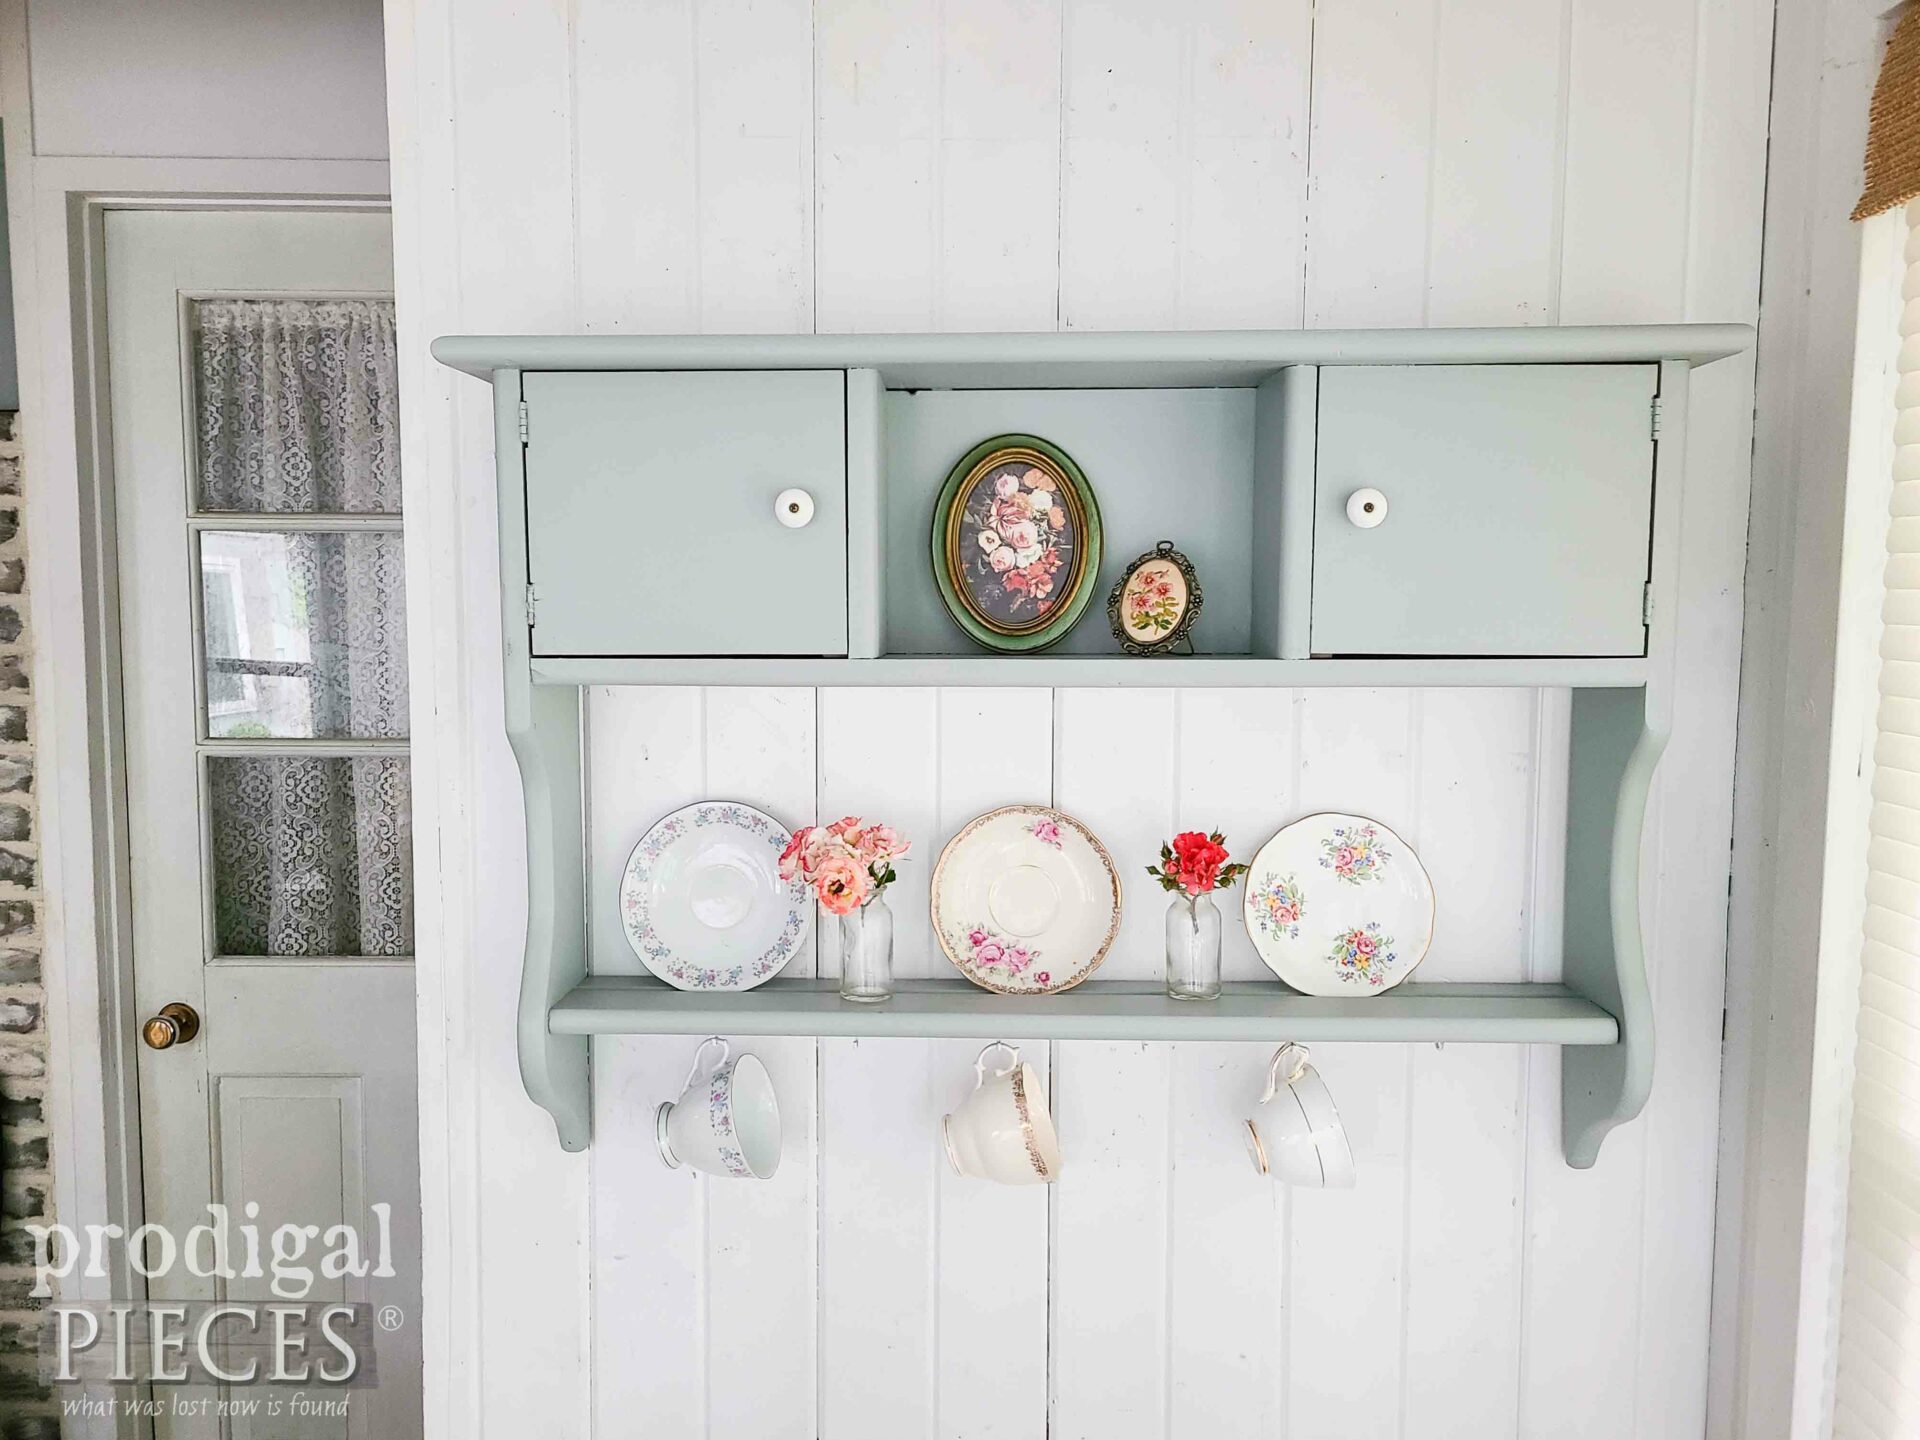 Painted Slate Green Vintage Cubby Shelf Makeover by Larissa of Prodigal Pieces | prodigalpieces.com #prodigalpieces #vintage #cottage